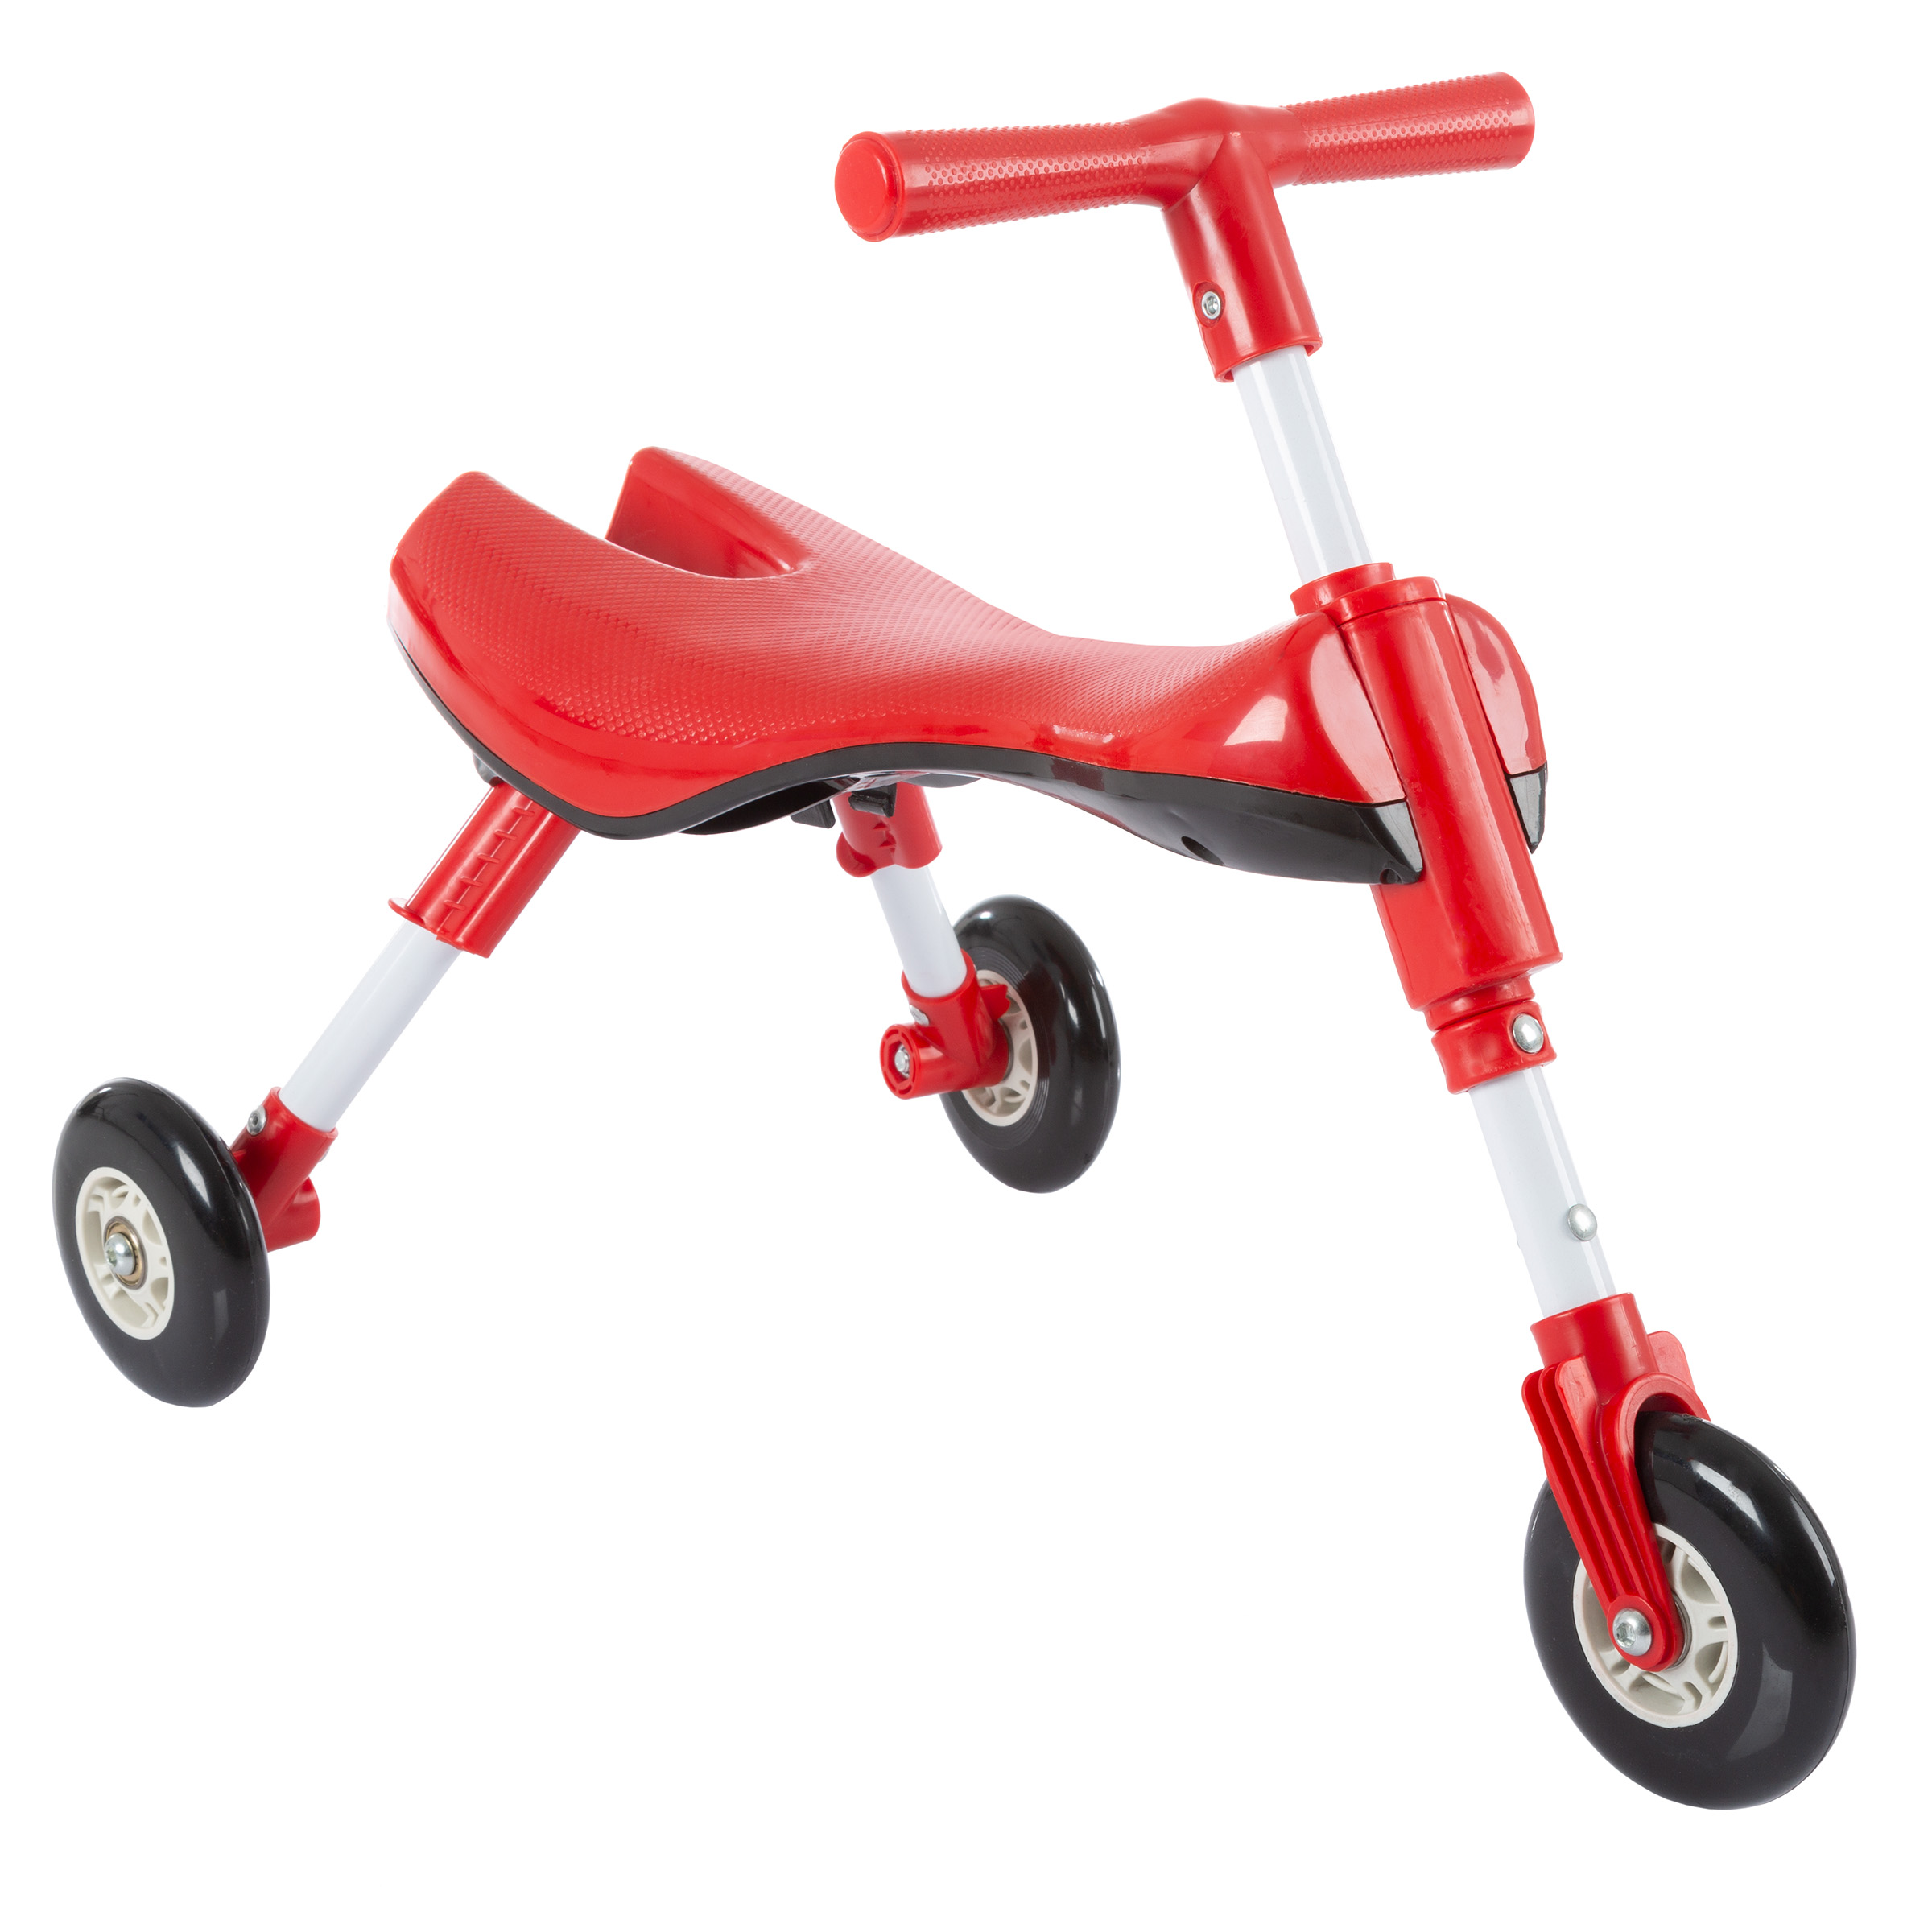 Glide Tricycle- Trike Ride On Toy with No Assembly, Foldable Design, Indoor Outdoor Wheels for Toddlers Learning to Walk, Balance by Lil’ Rider - image 1 of 7